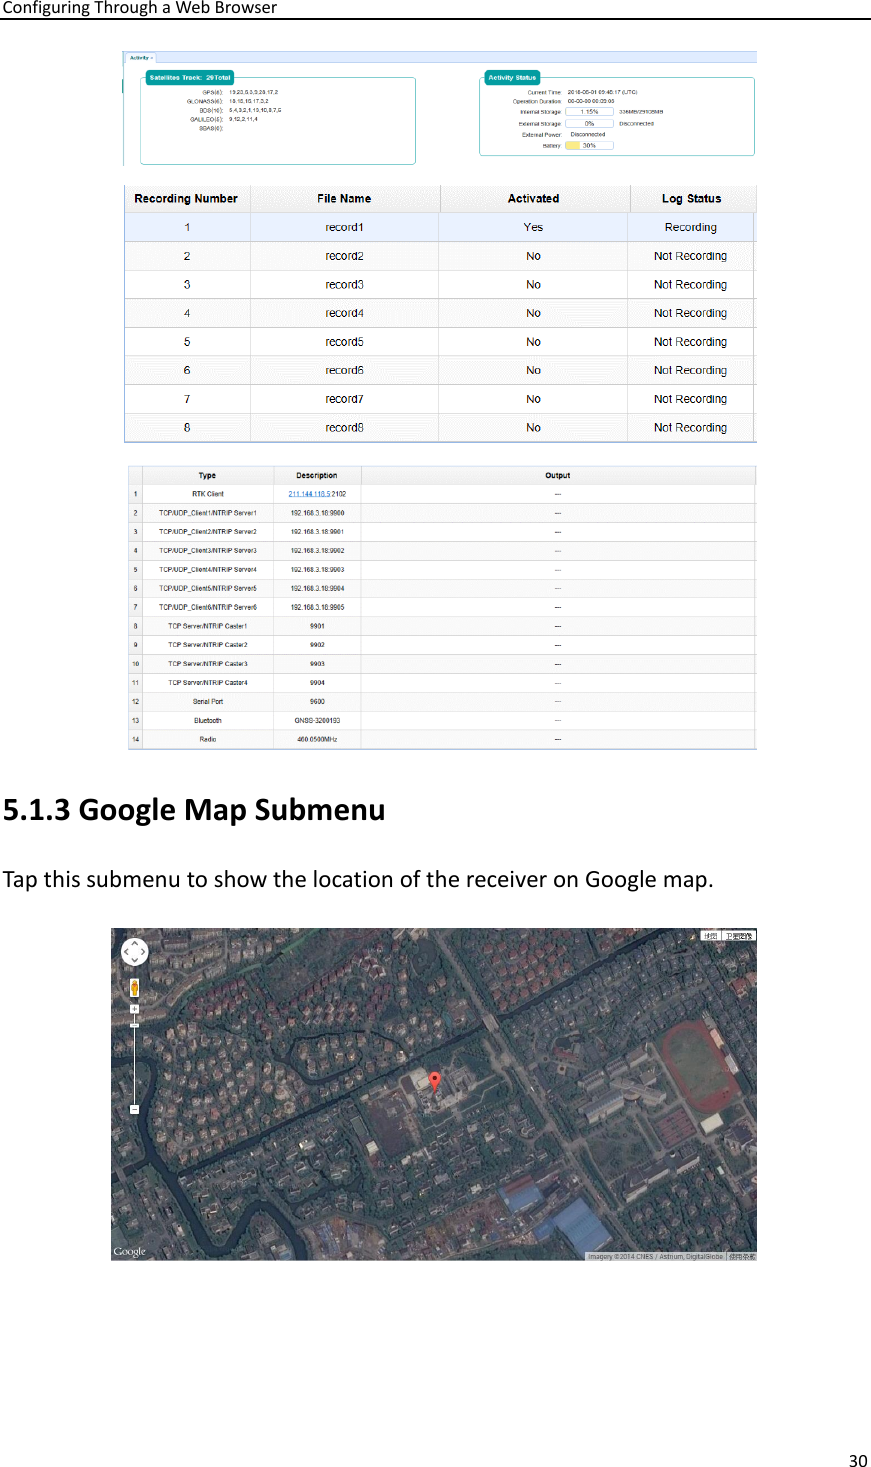 Configuring Through a Web Browser 30   5.1.3 Google Map Submenu Tap this submenu to show the location of the receiver on Google map.    